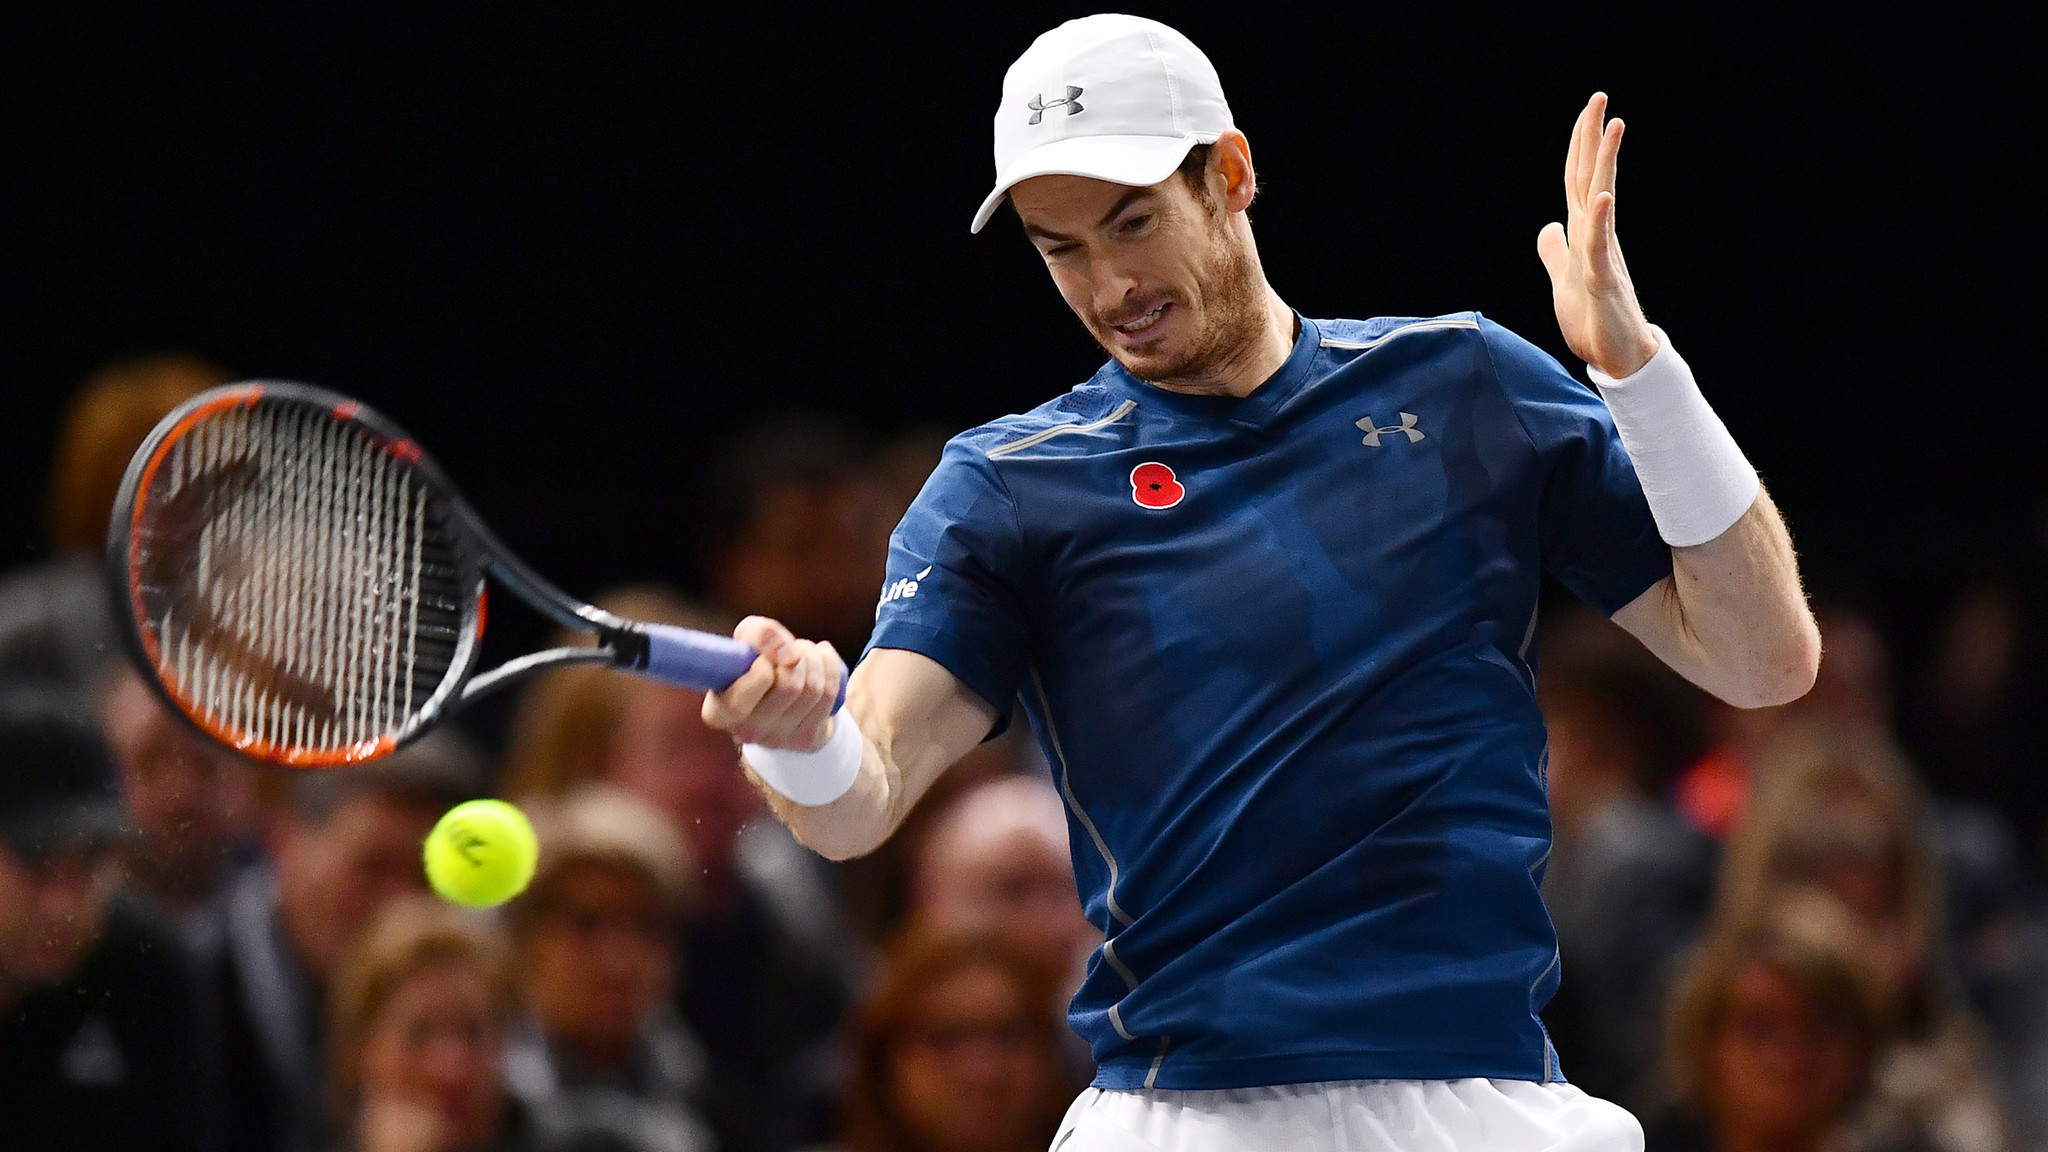 New No. 1 Andy Murray beats John Isner for Paris Masters title - Los Angeles Times